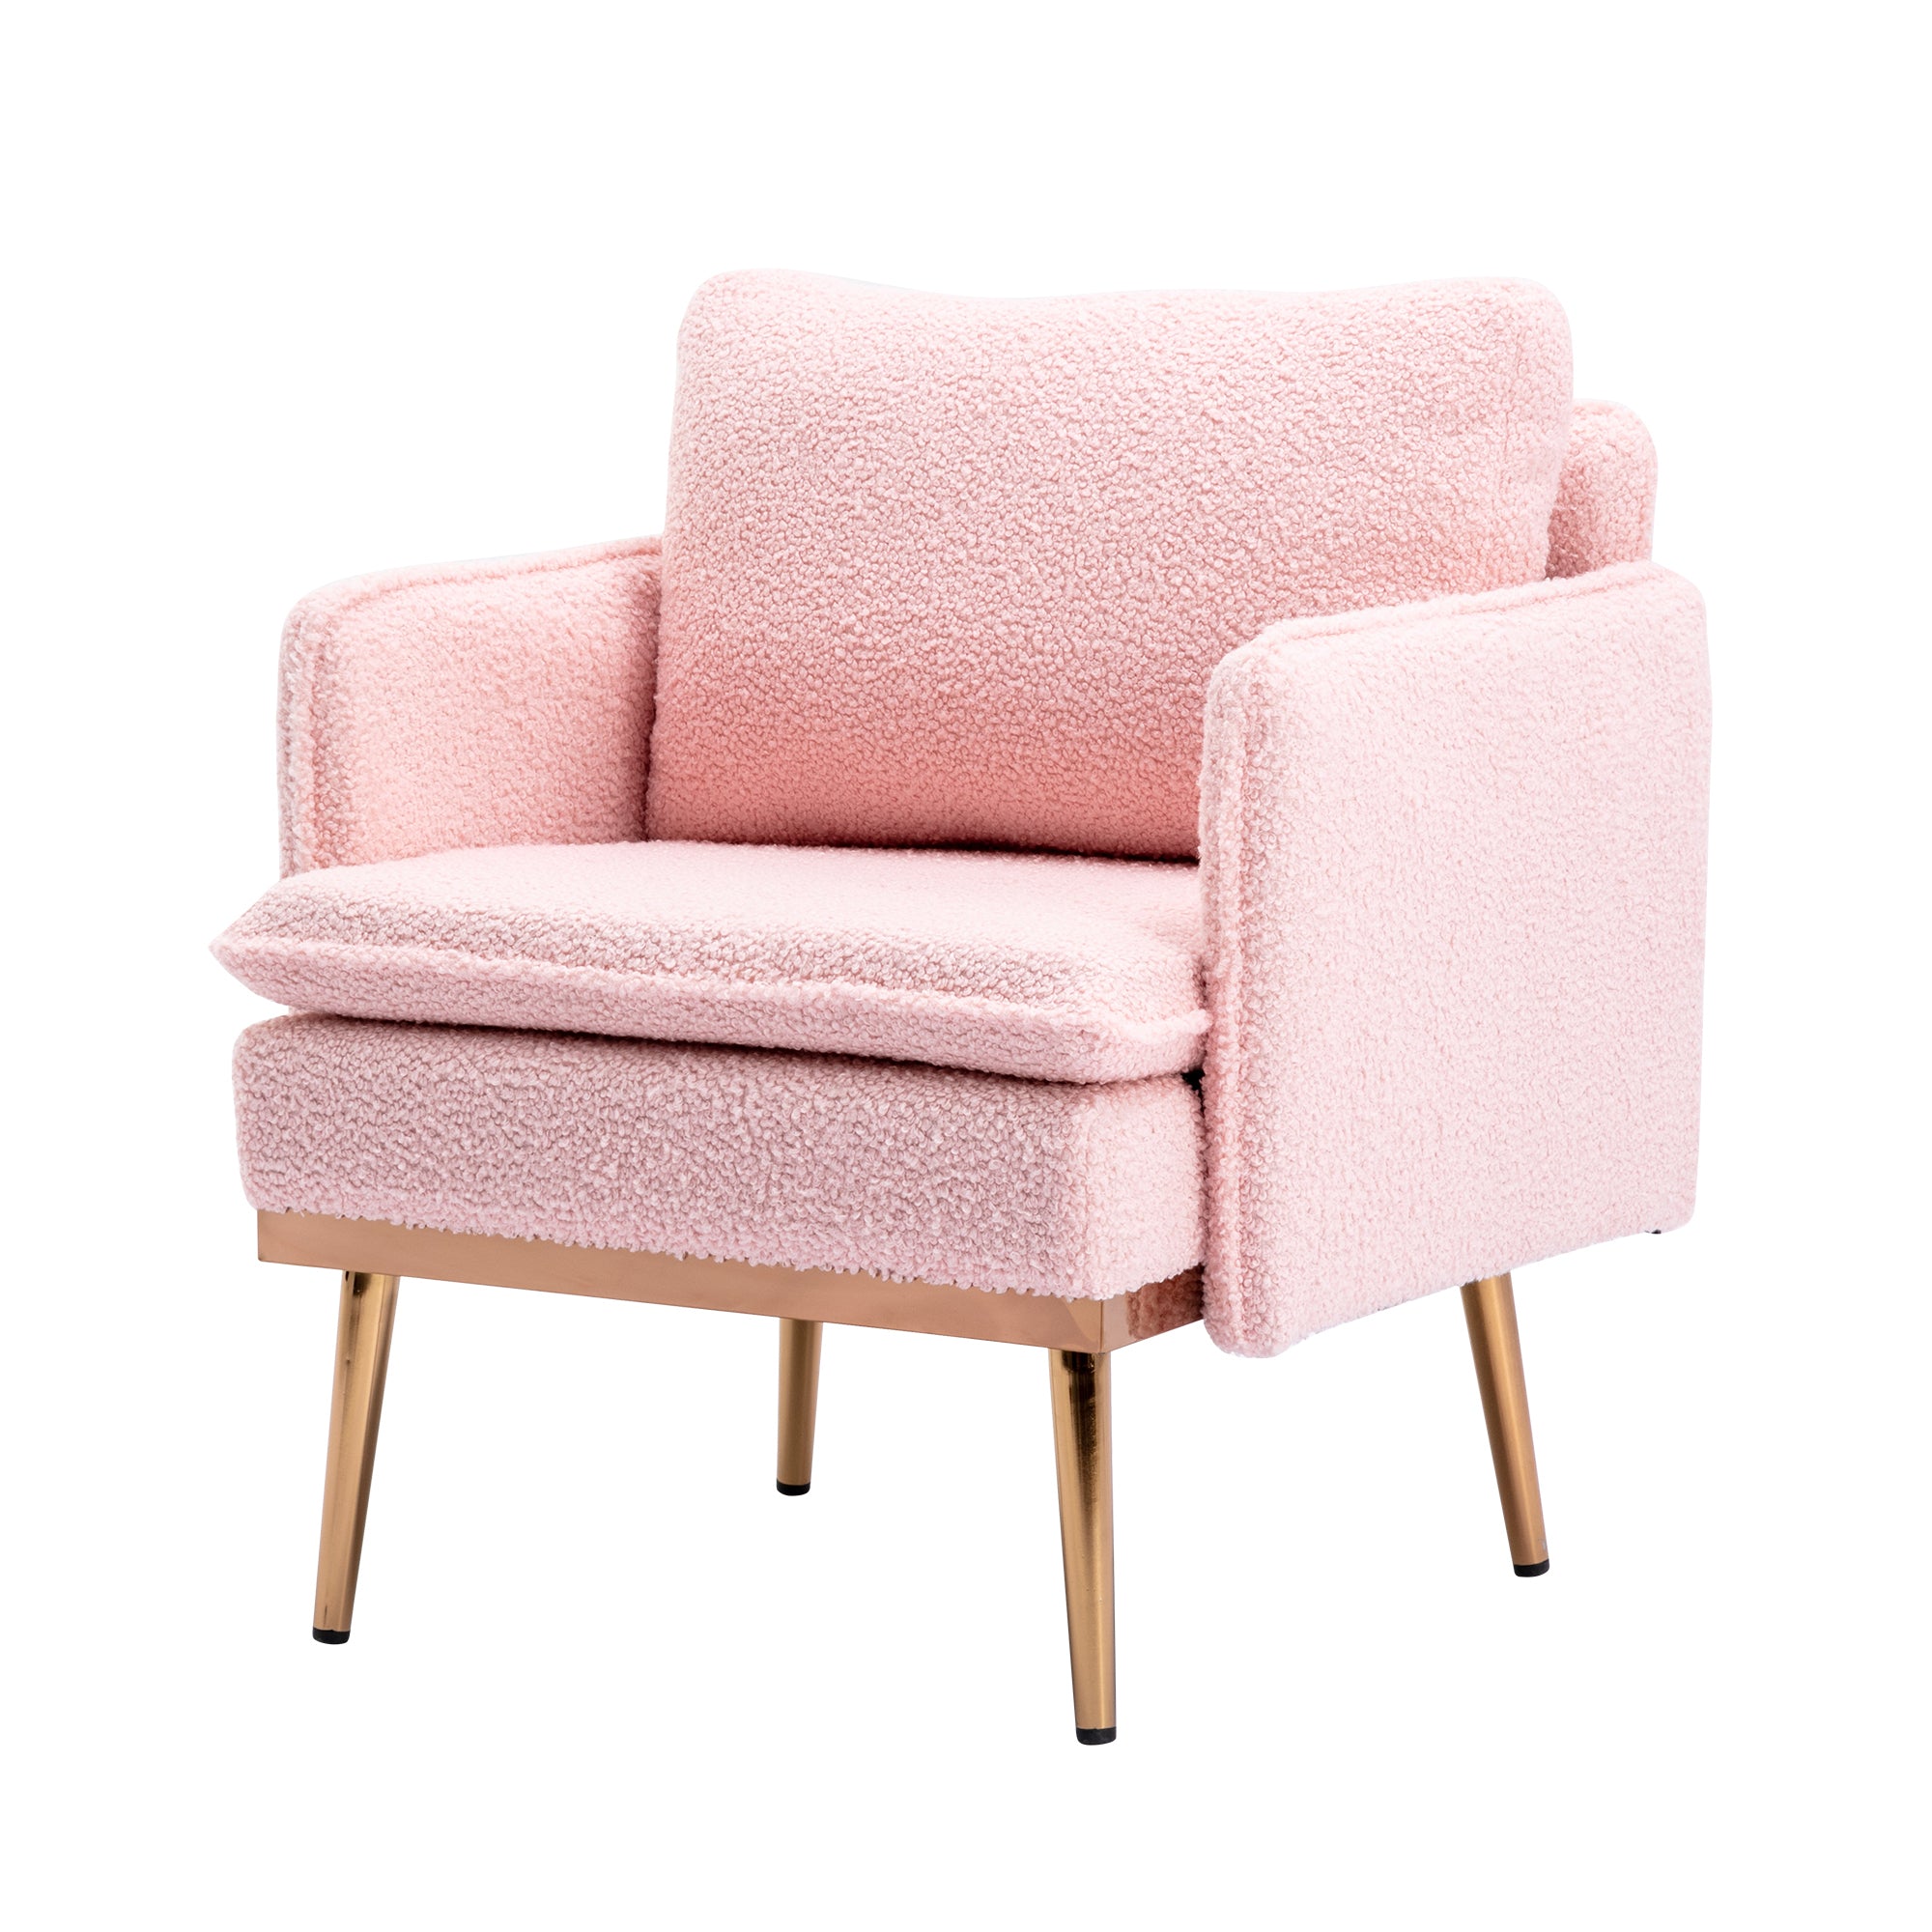 Lounge Chair, Accent Chair - Pink Teddy